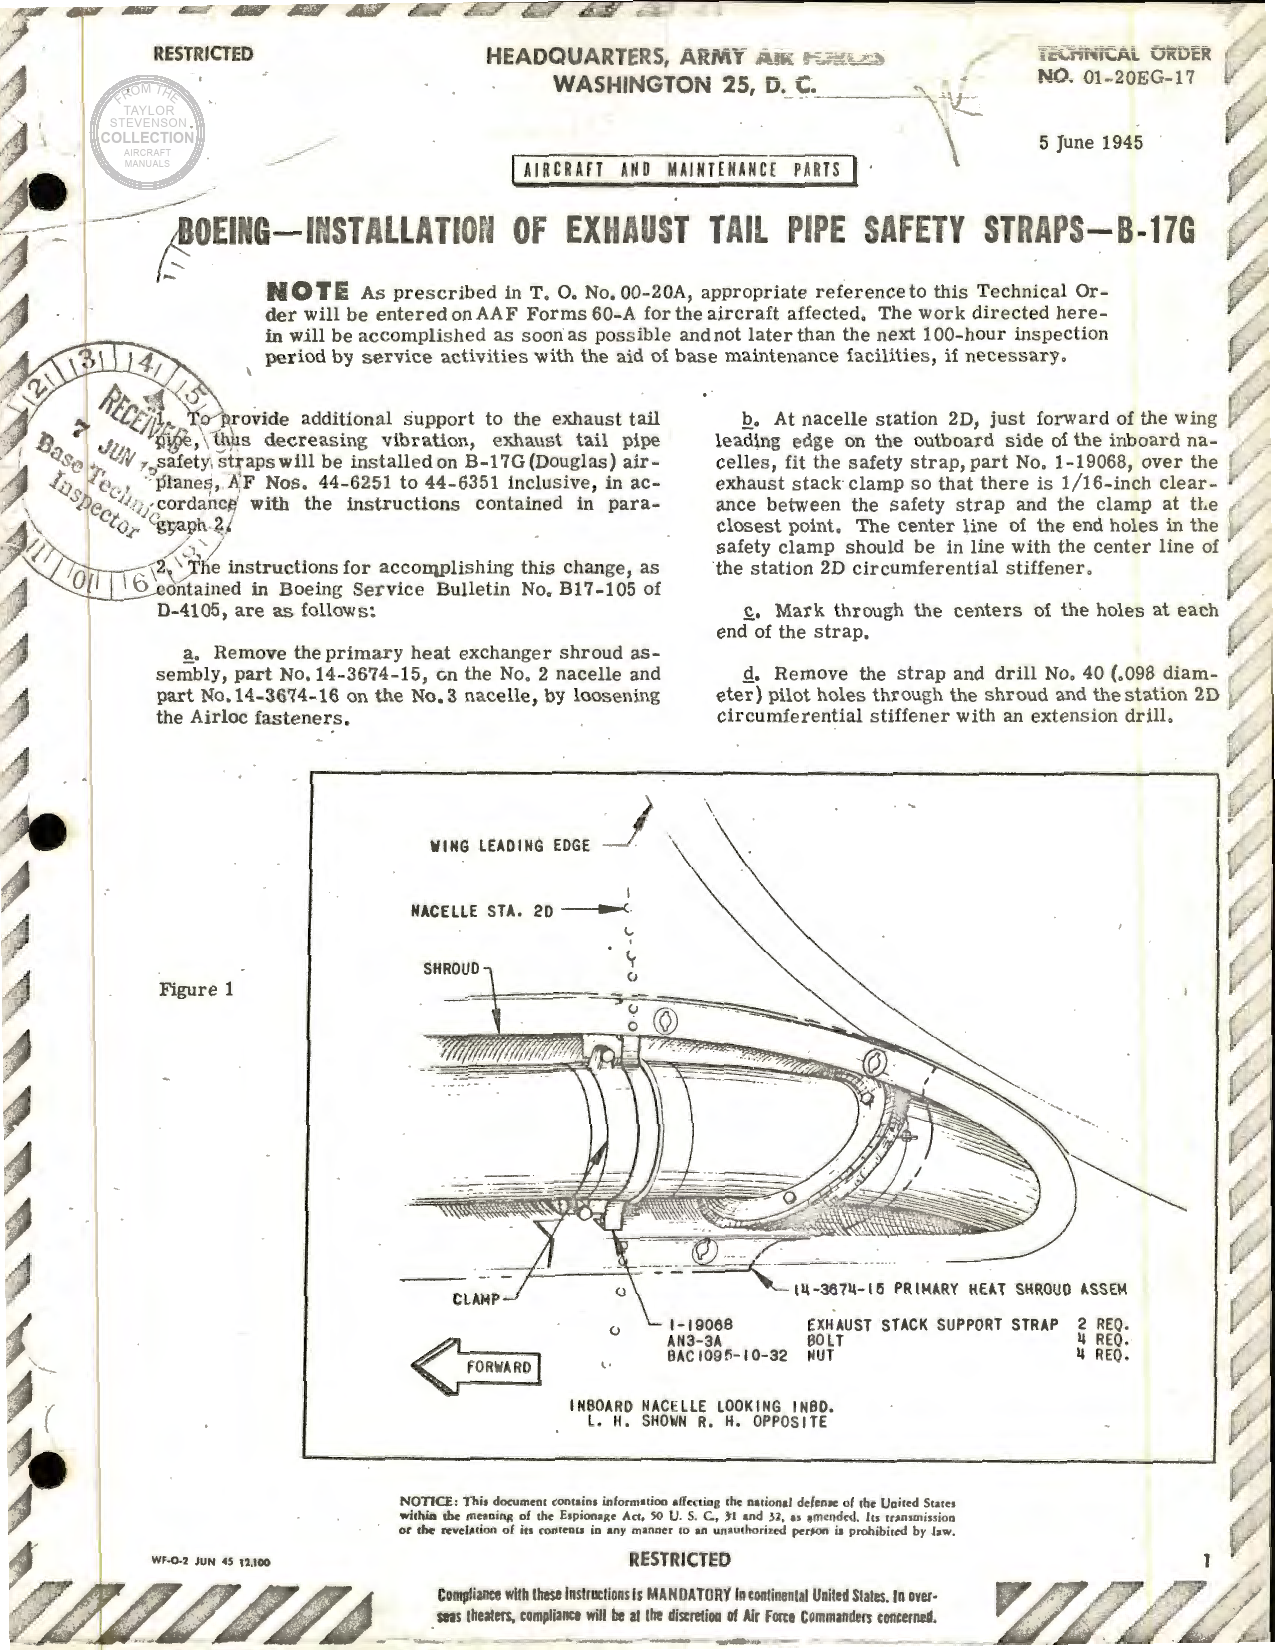 Sample page 1 from AirCorps Library document: Installation of Exhaust Tail Pipe Safety Straps for B-17G